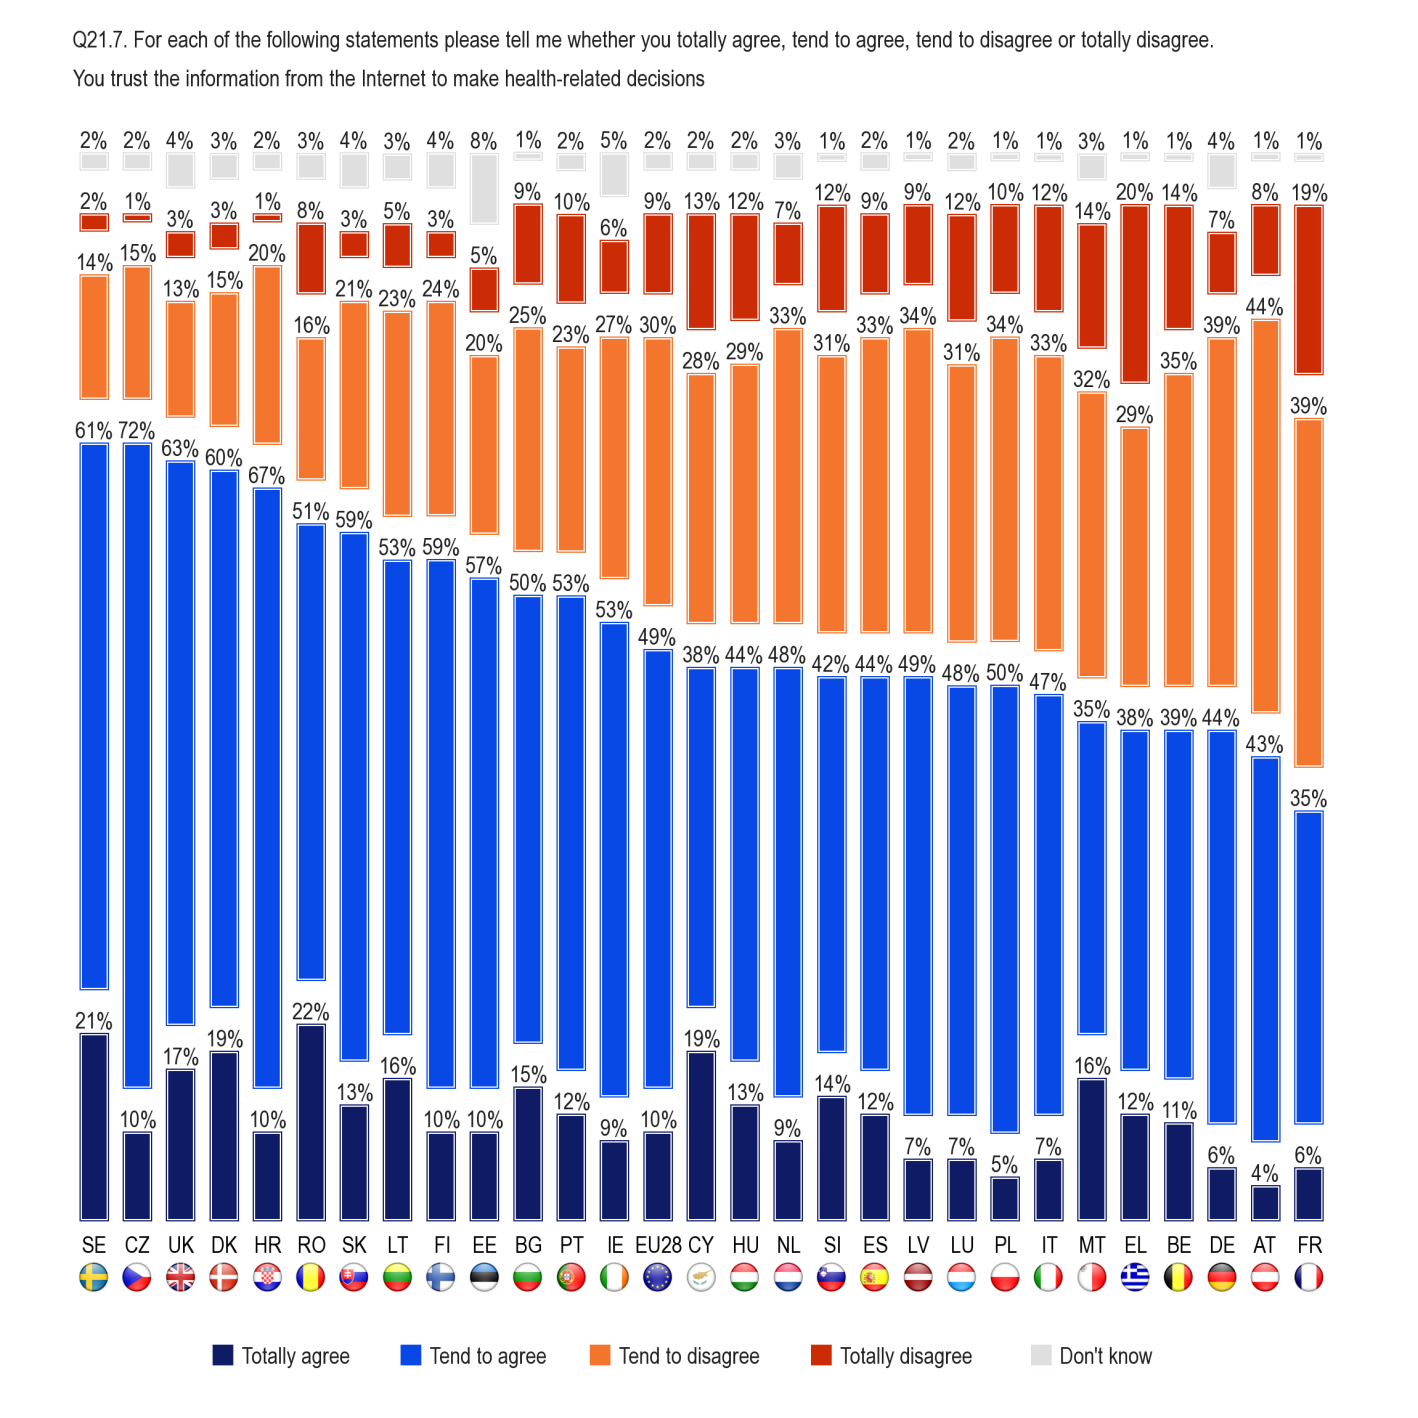 FLASH EUROBAROMETER In 13 Member States, at least 60% of people agree that they can trust information from the Internet to make health-related decisions.